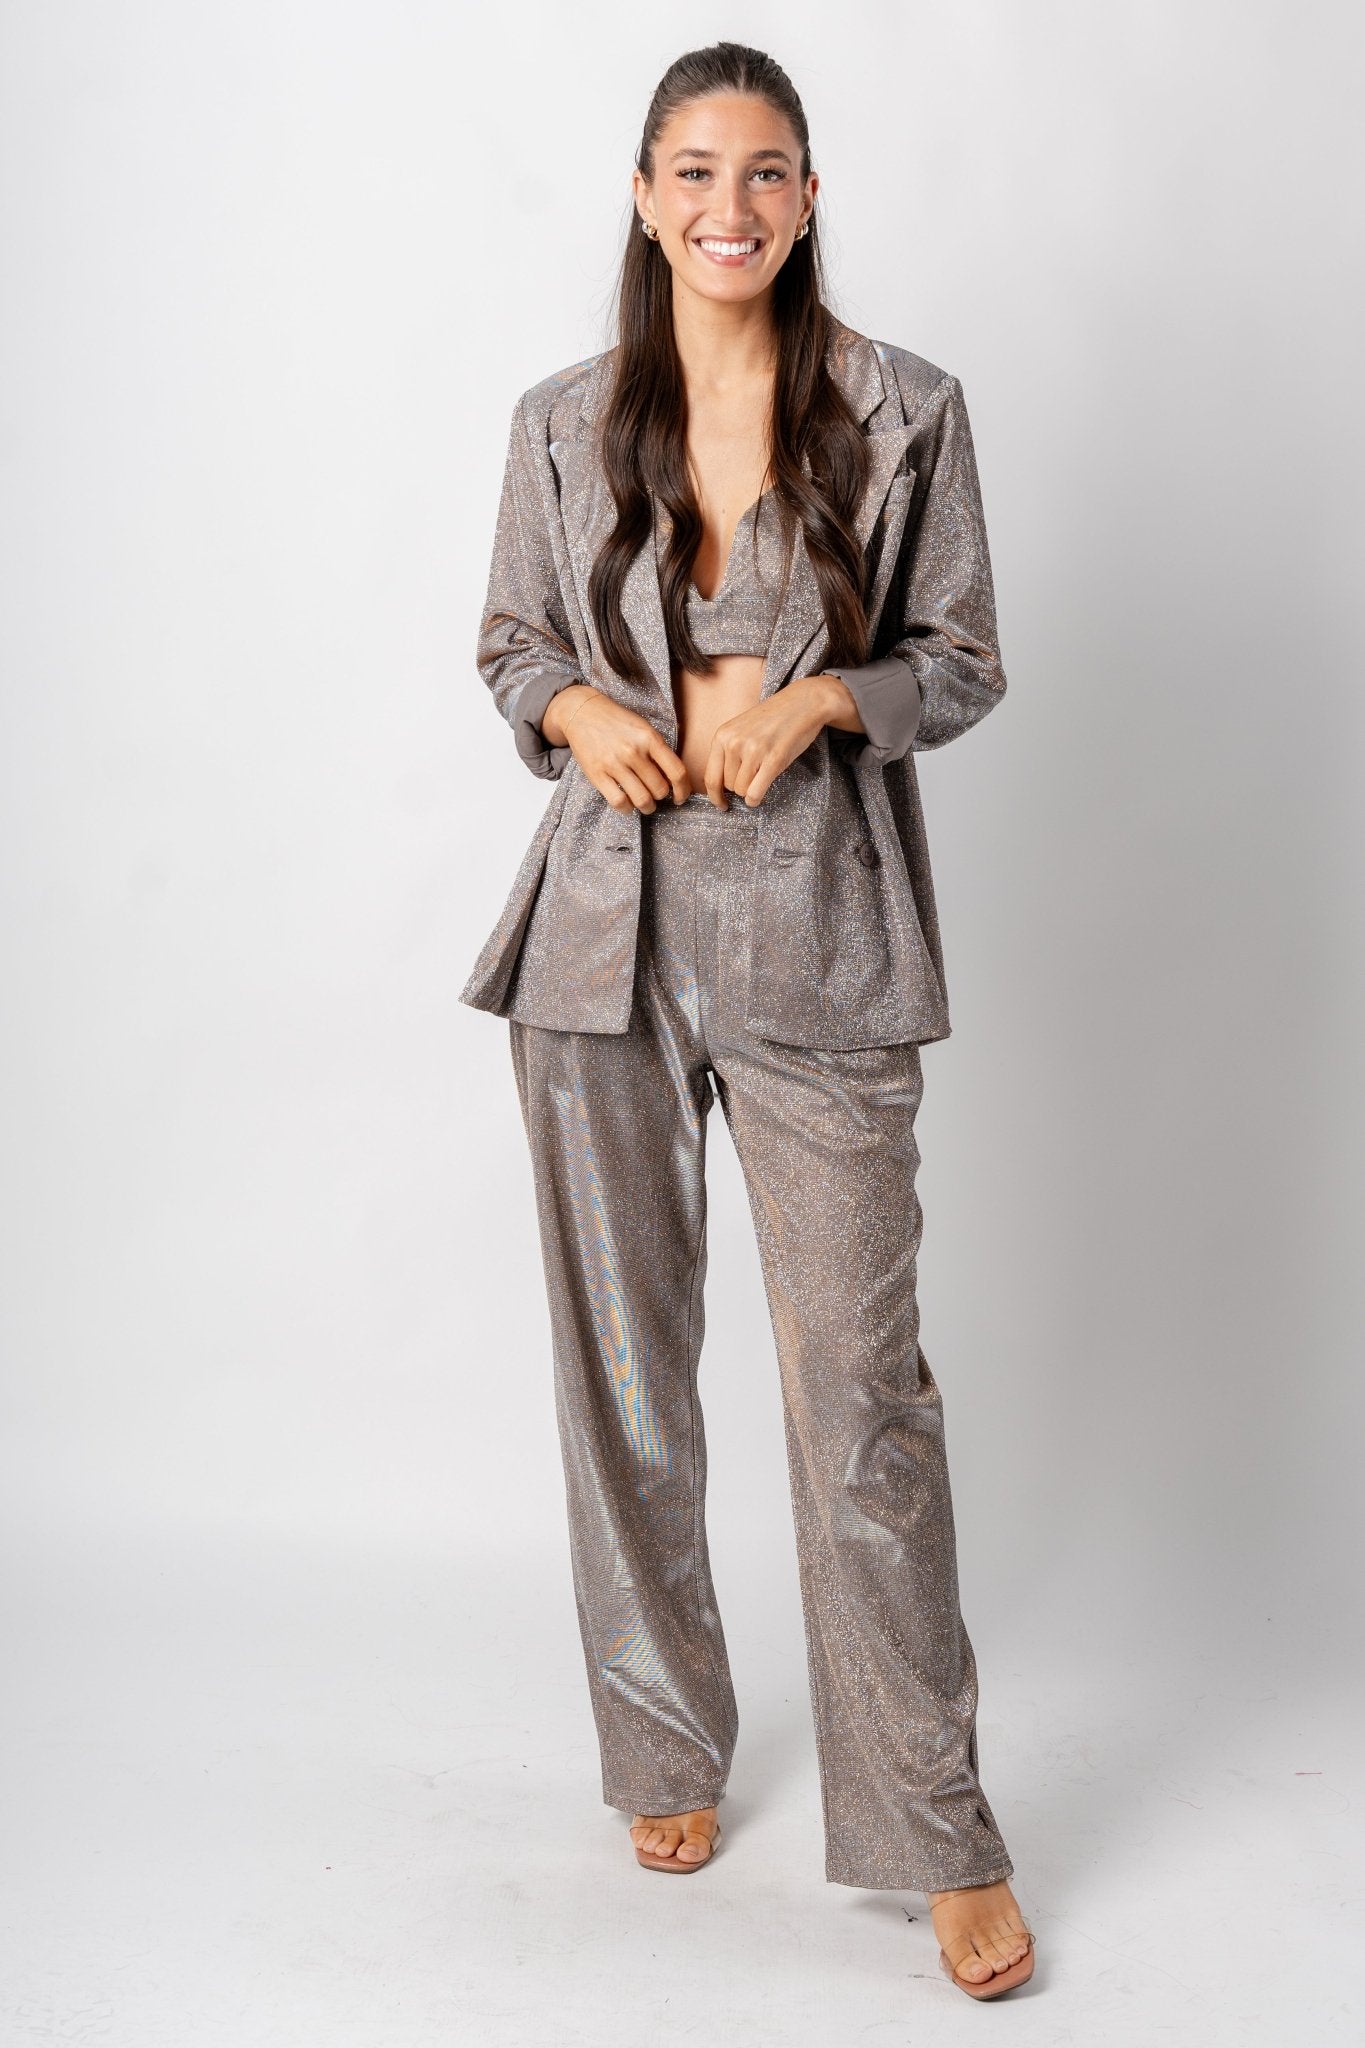 High waist glitter wide leg pants tan/silver - Affordable New Year's Eve Party Outfits at Lush Fashion Lounge Boutique in Oklahoma City